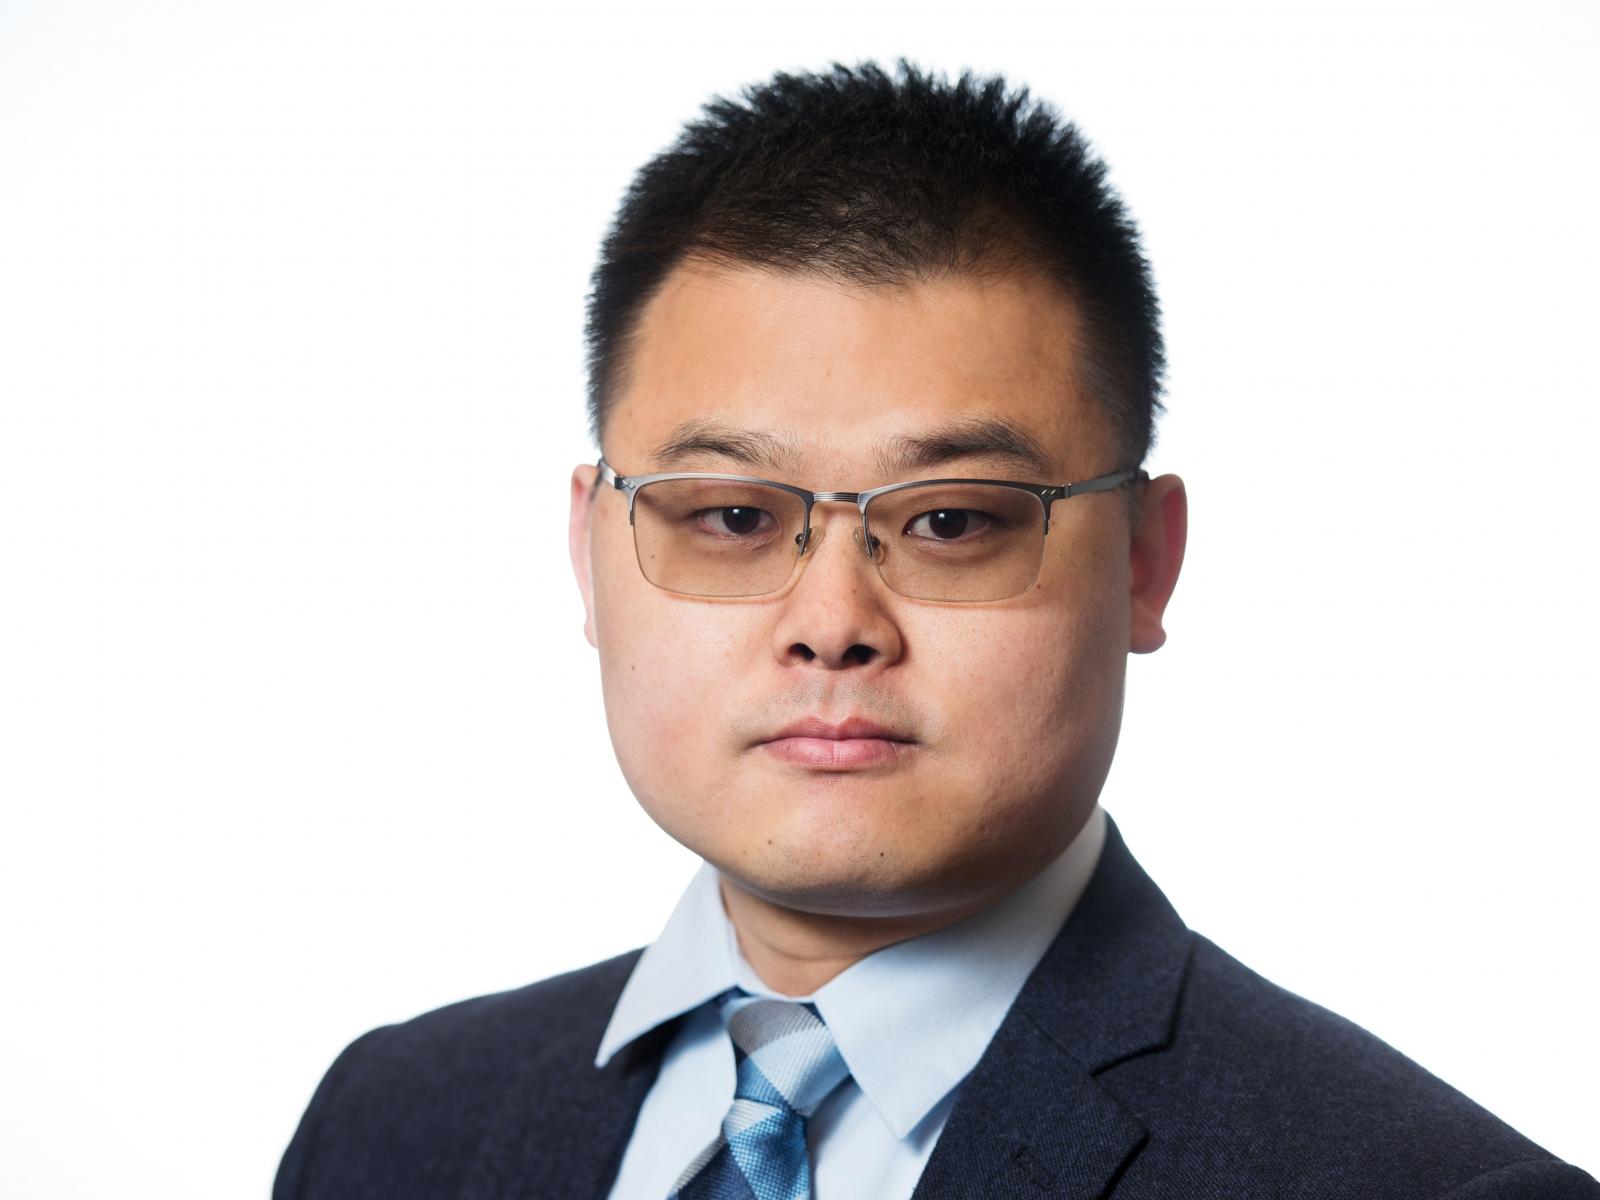 photo of a man wearing glasses in a suit